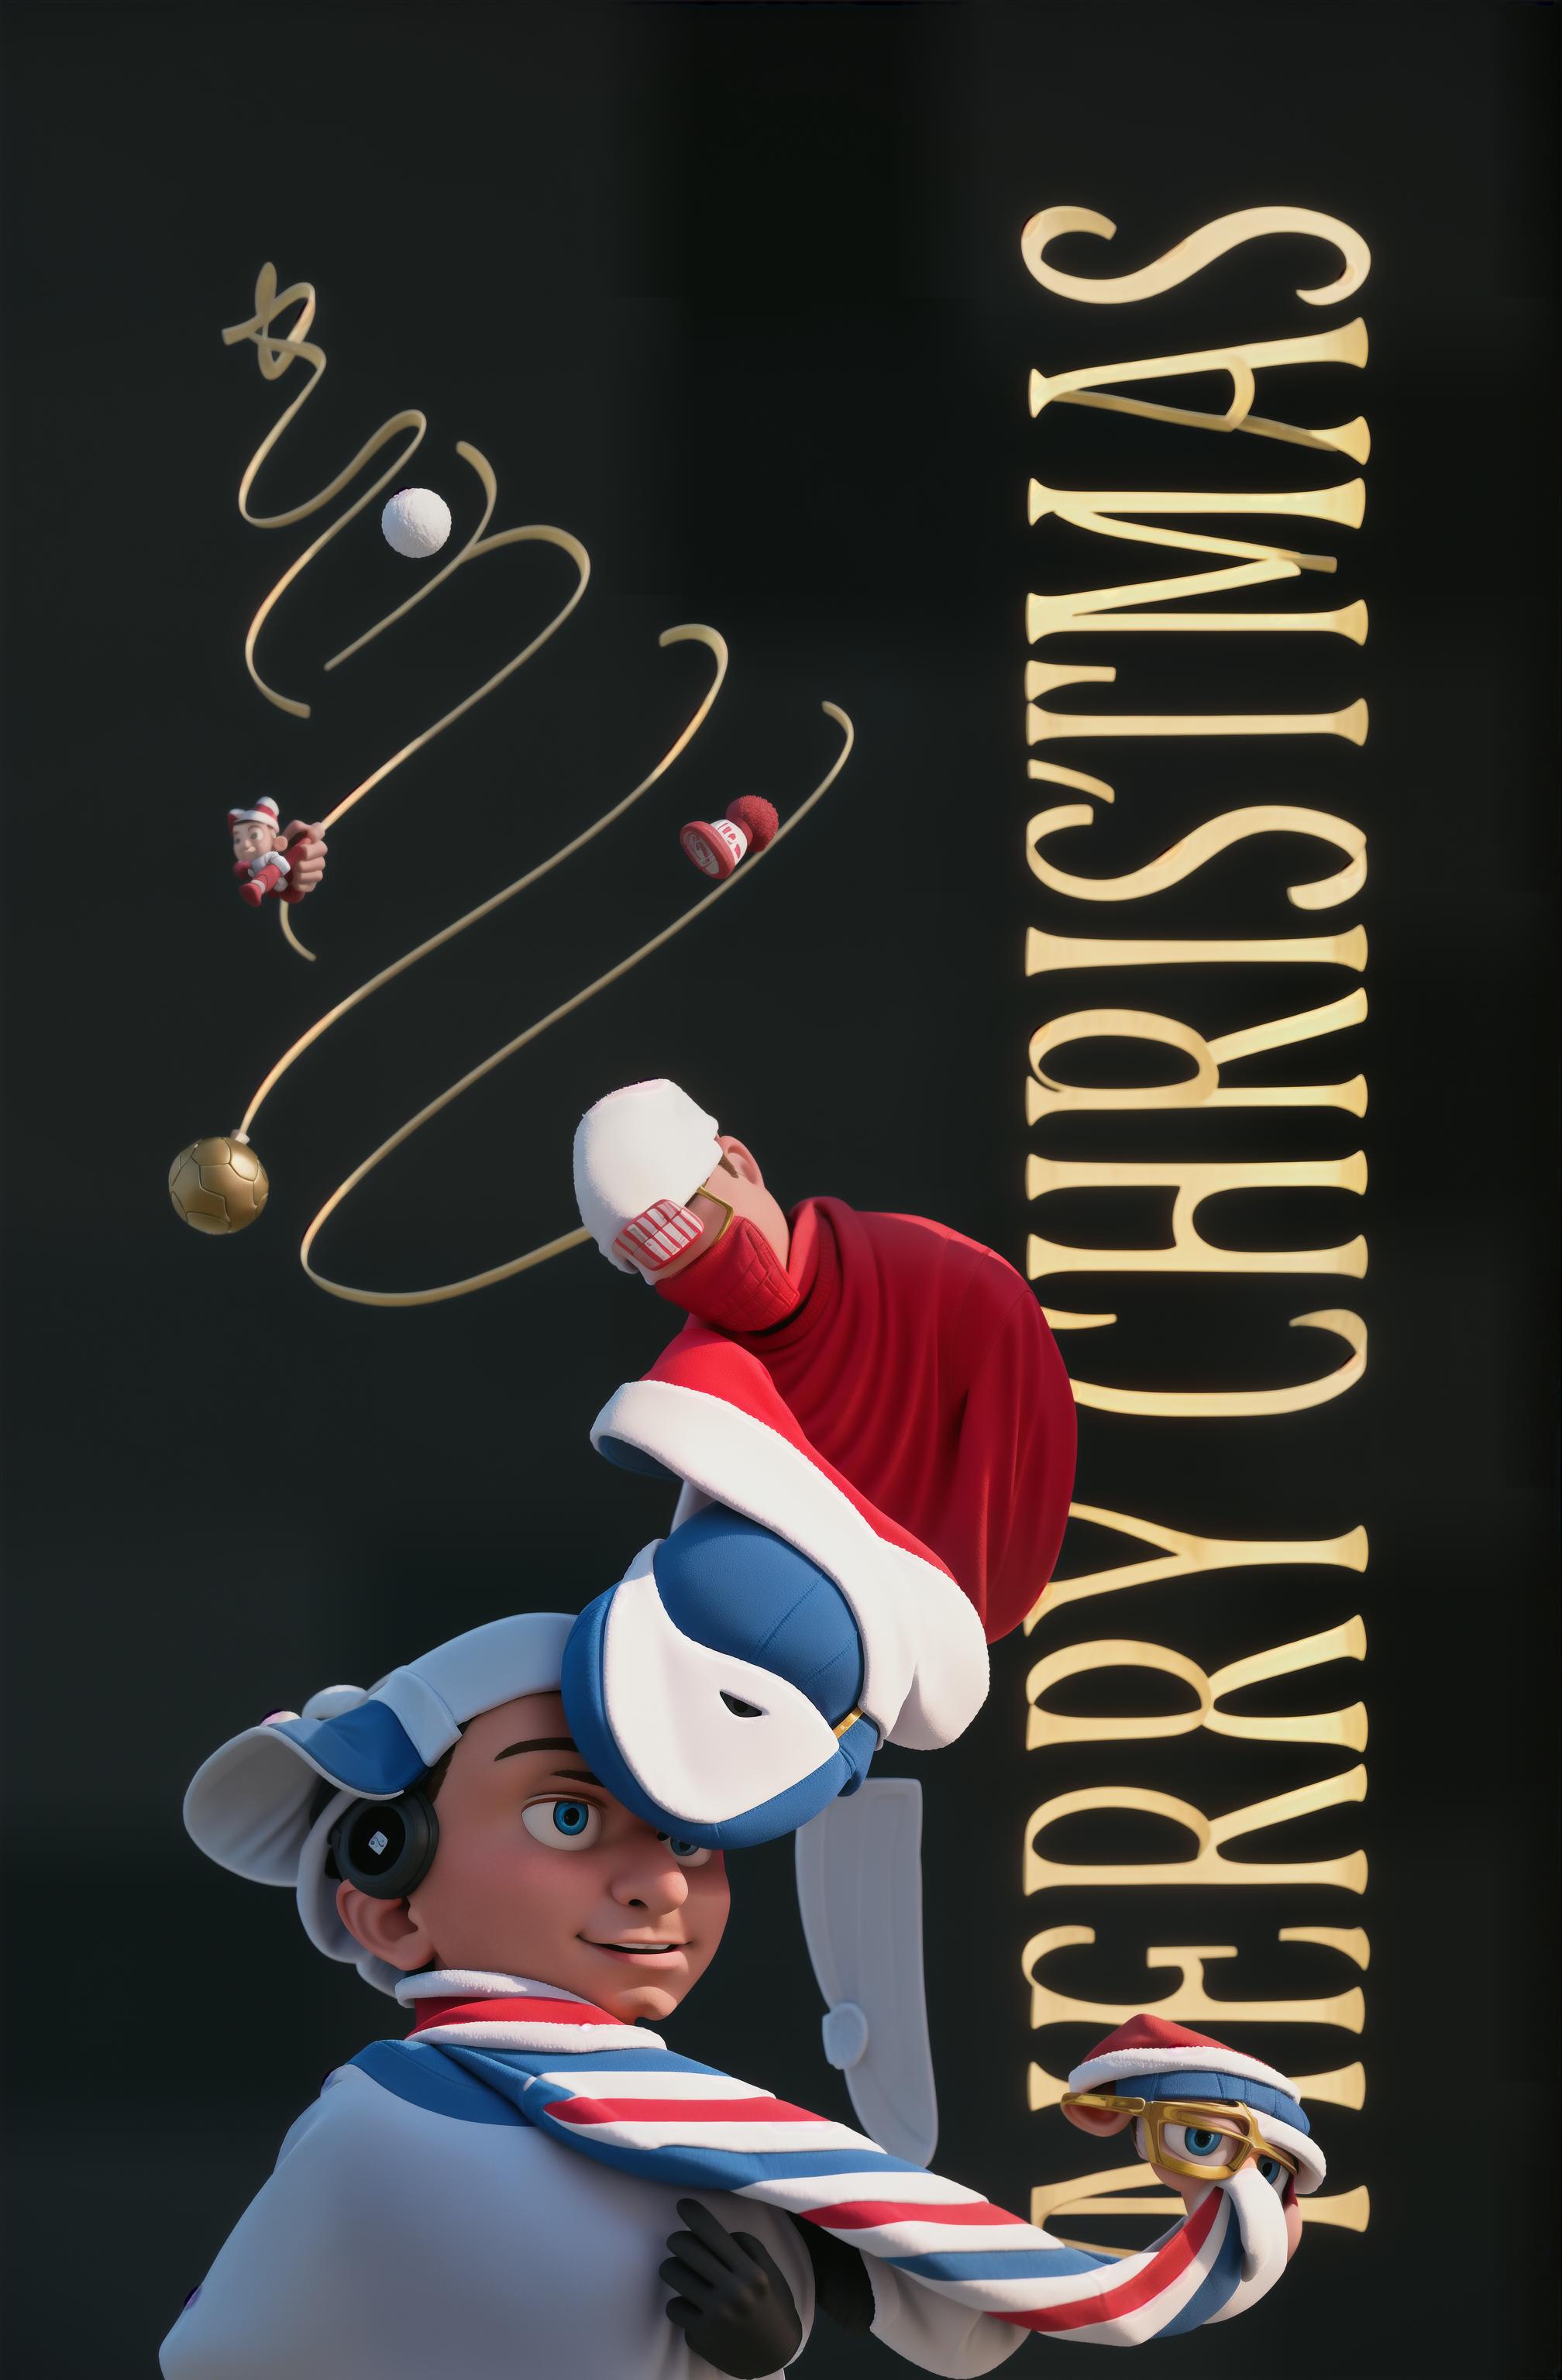  Masterpiece, best quality, one person, American, one face, sport, hockey, Christmas, hockey player, Christmas candy in hand, Christmas hat on player's head, blue goggles